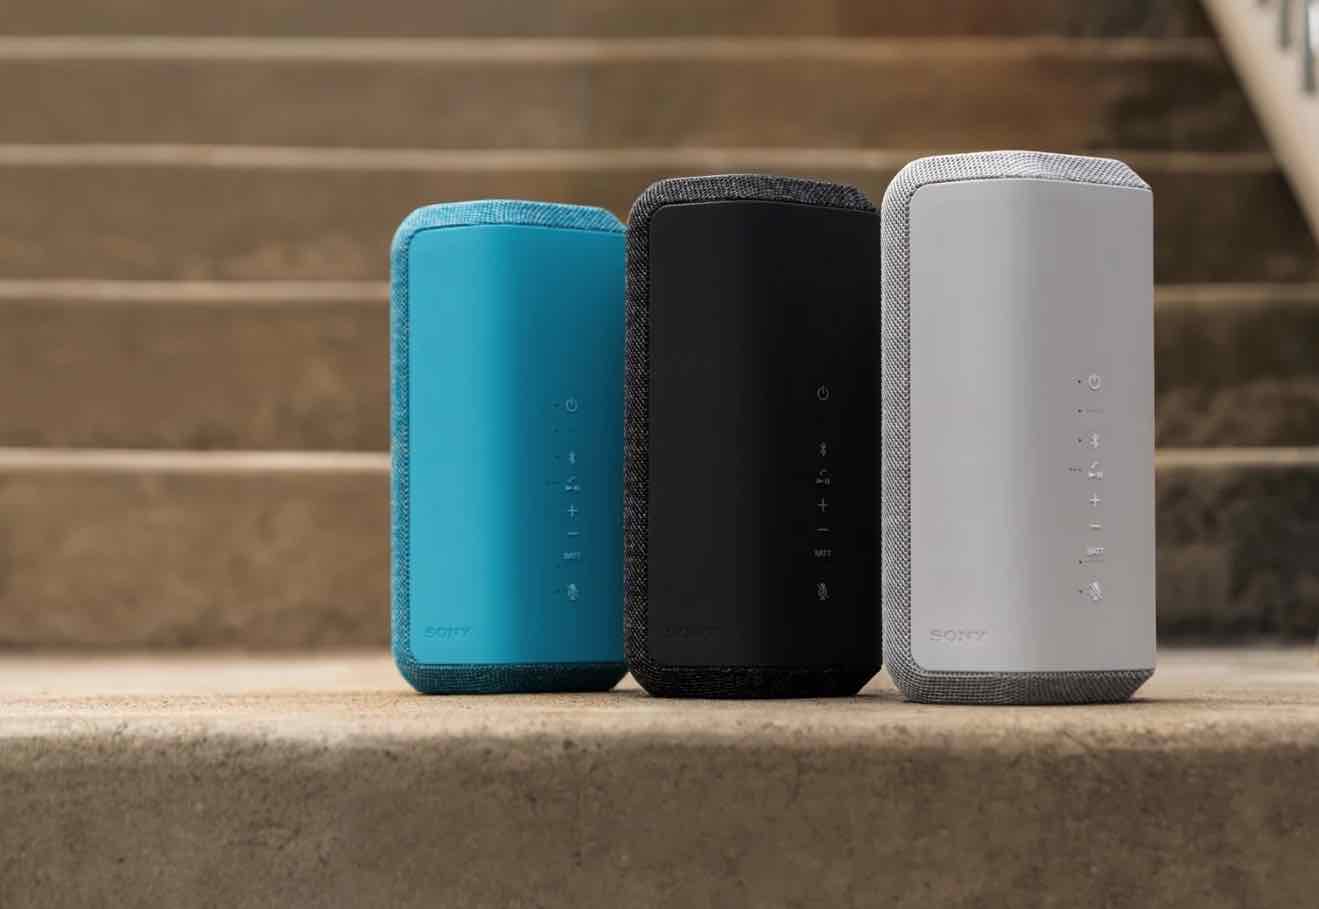 Can You Pair Multiple Devices to a Bluetooth Speaker?